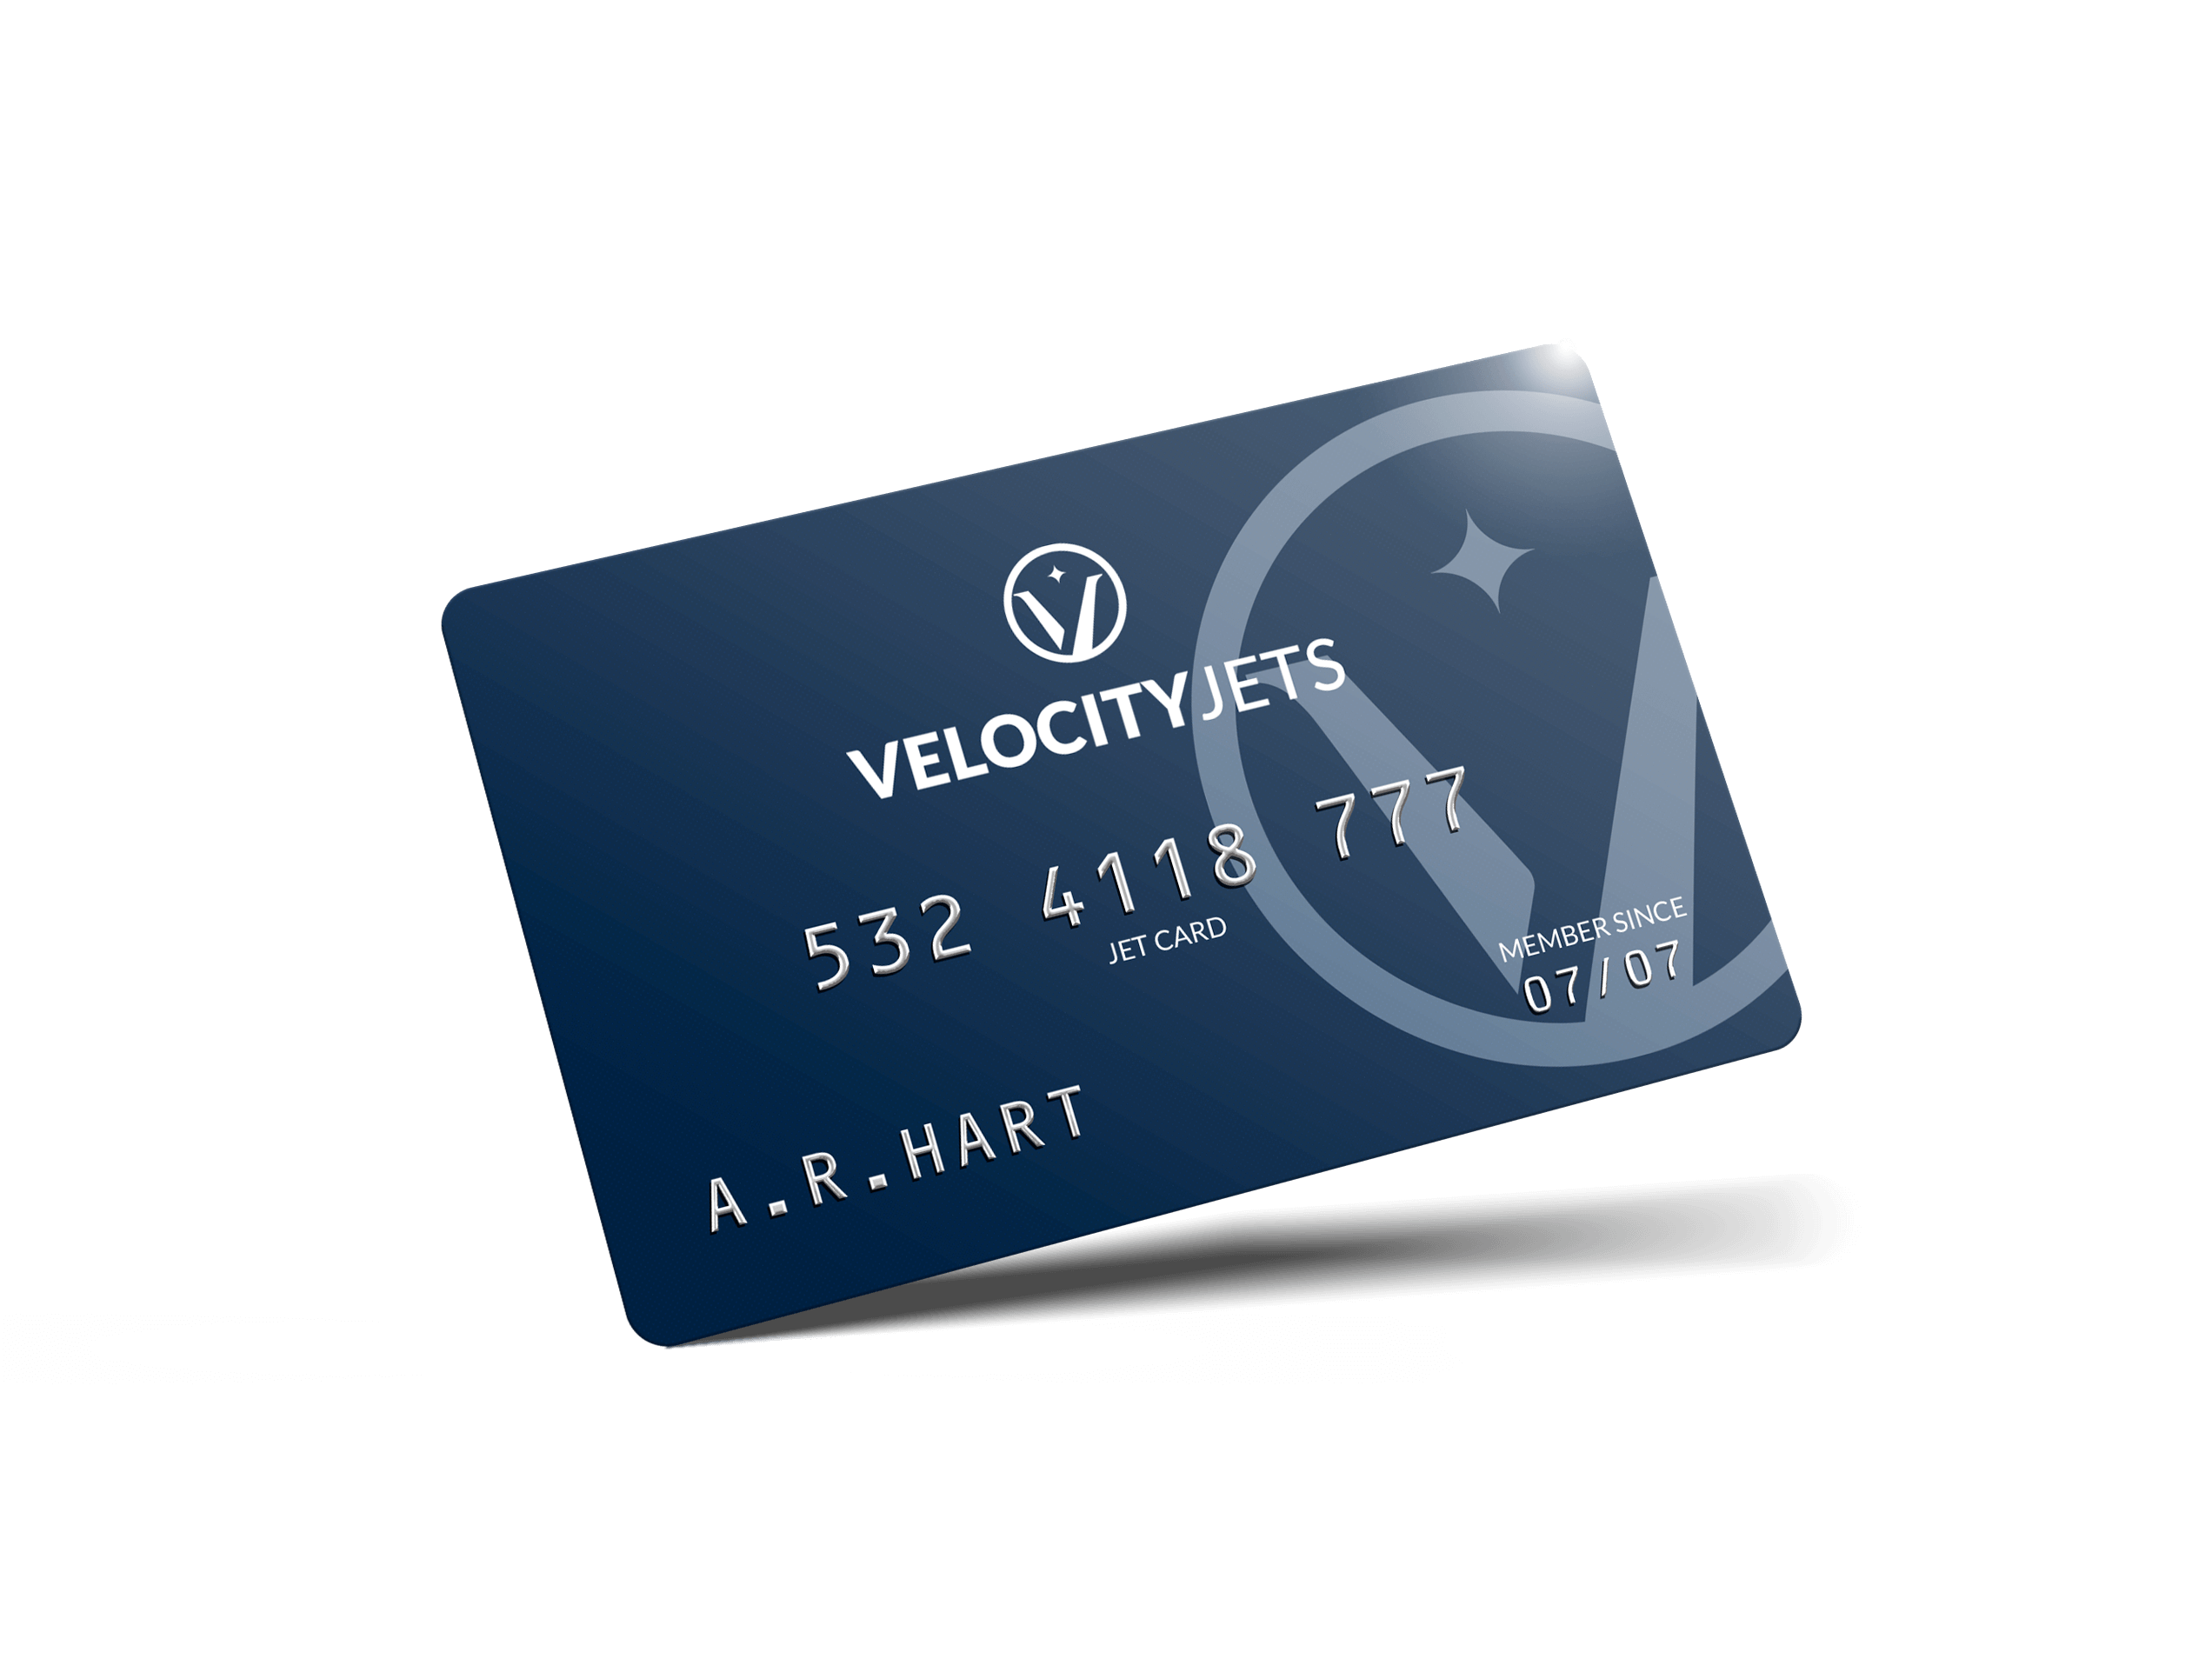 Learn about jet cards here! Safely travel | VelocityJets